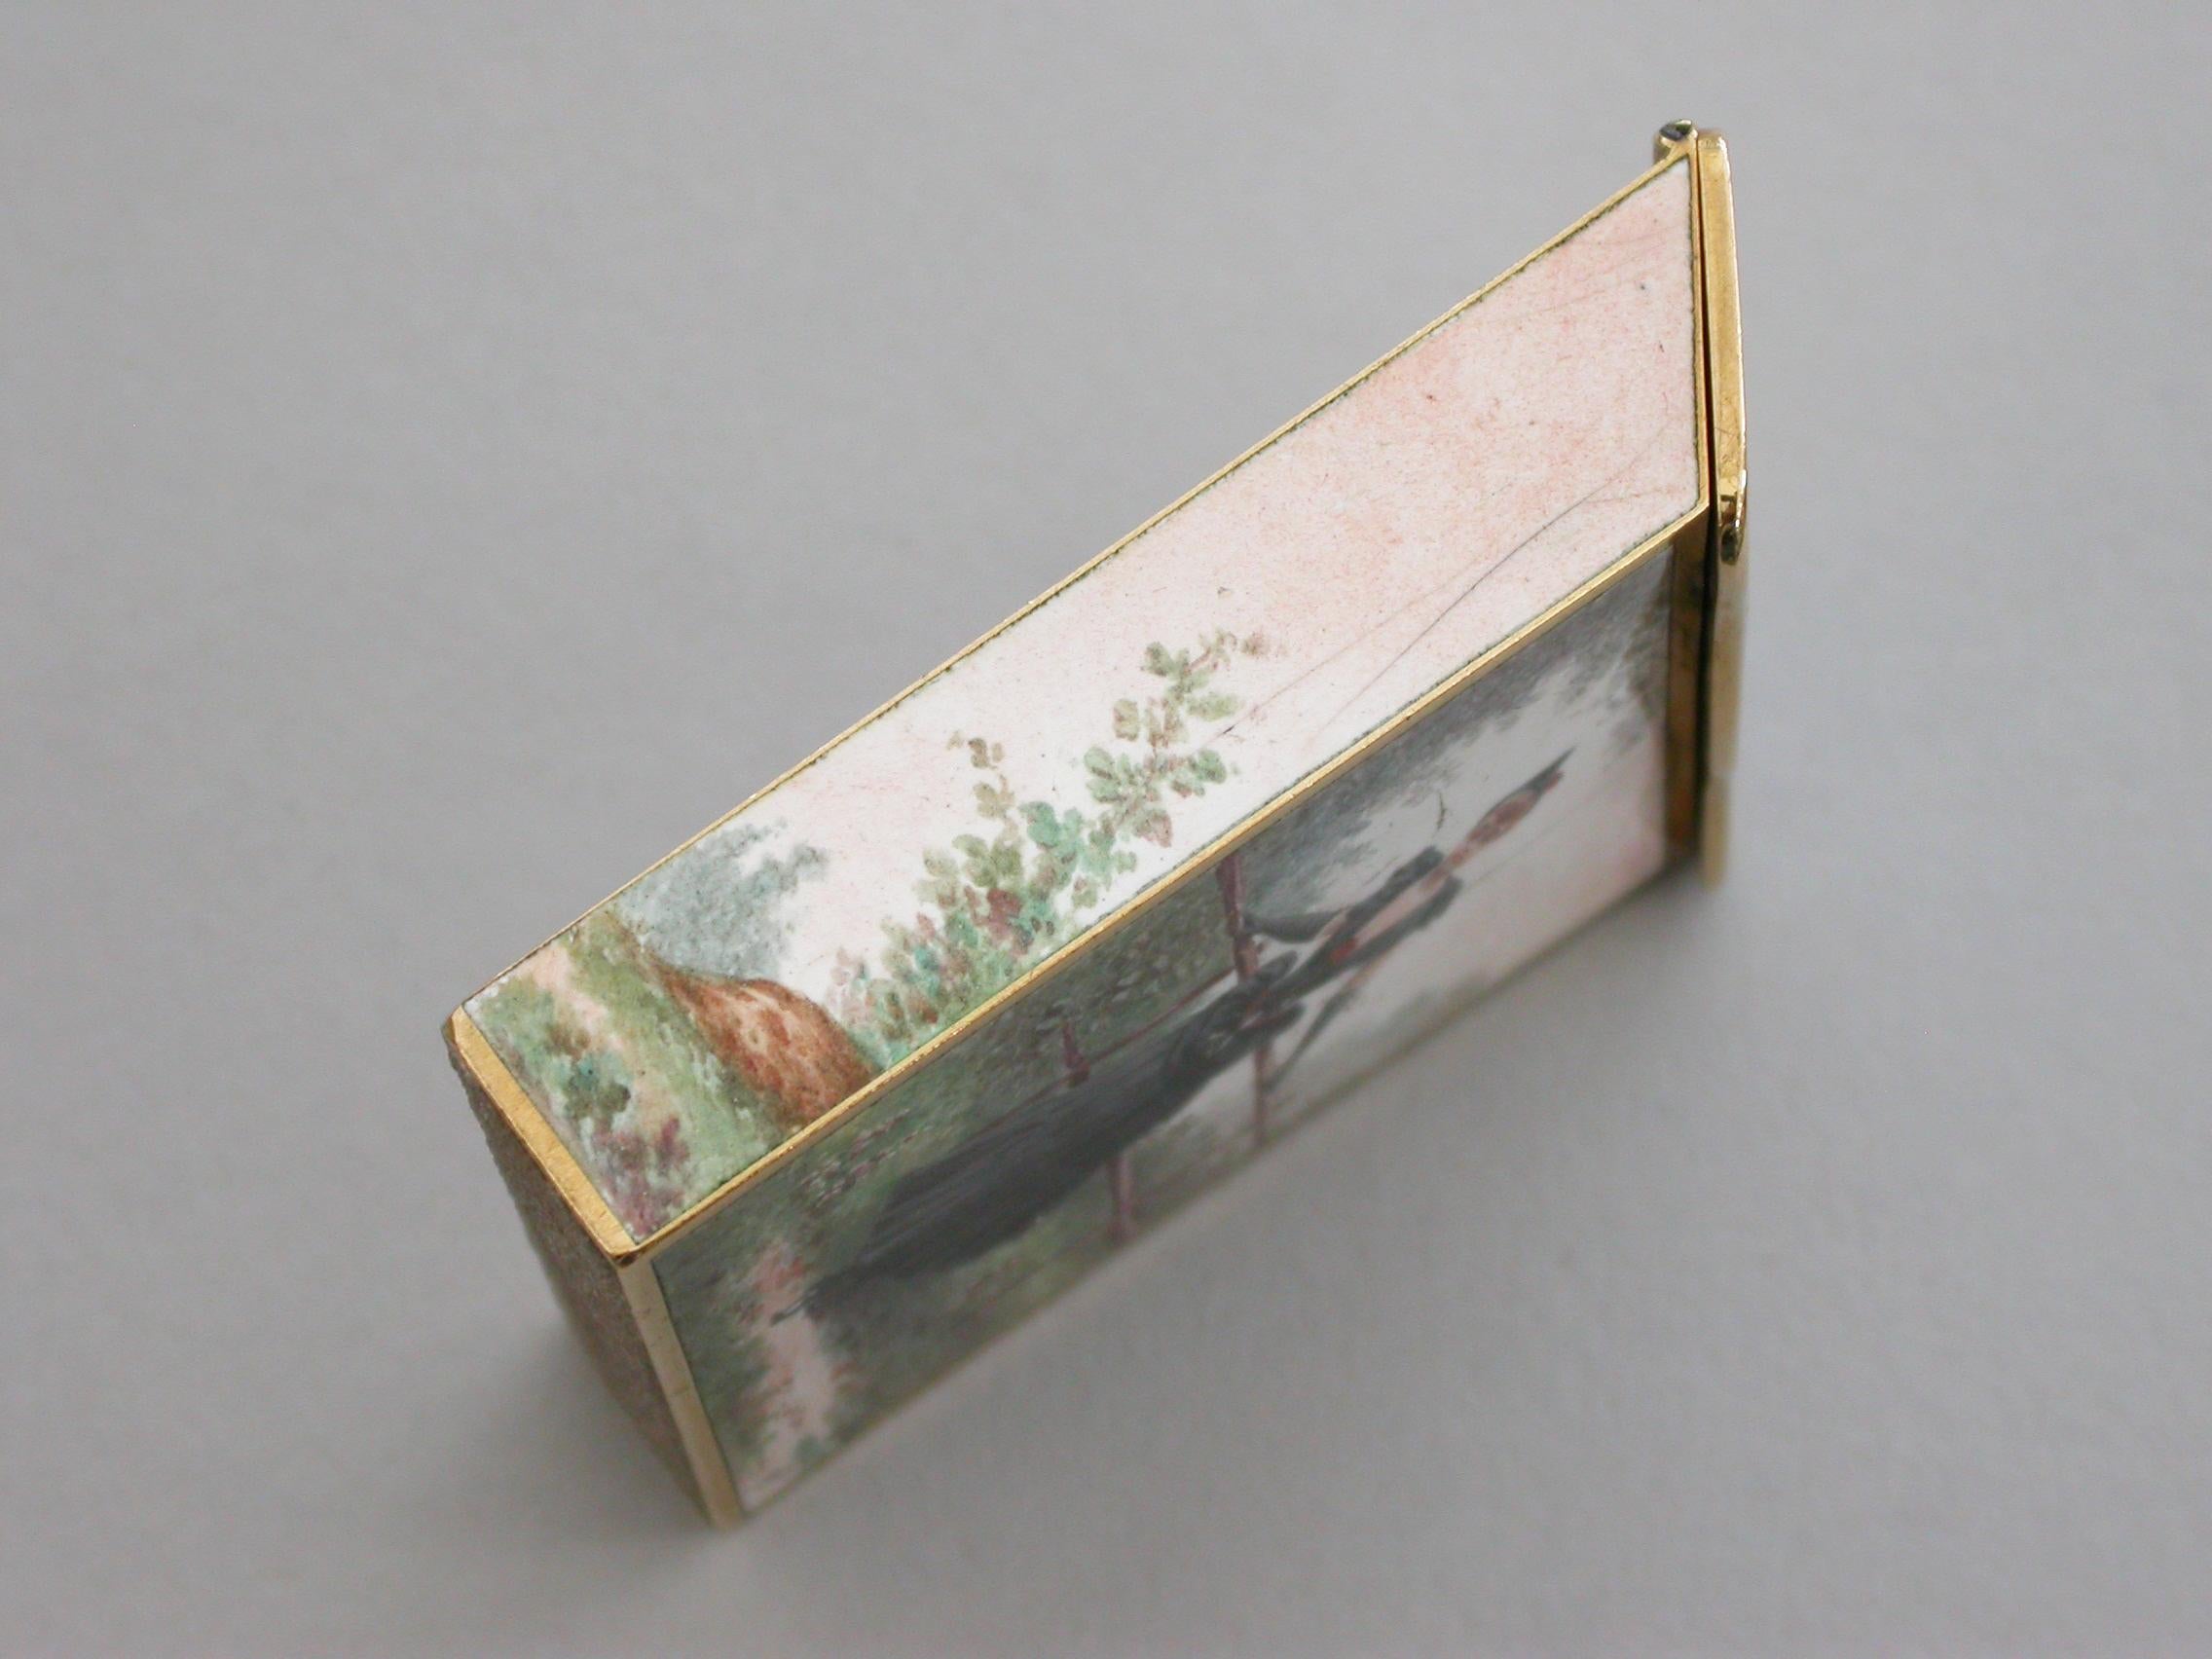 Late 19th Century French Gold and Enamel Vesta Case �‘Sappho’, circa 1900 For Sale 3